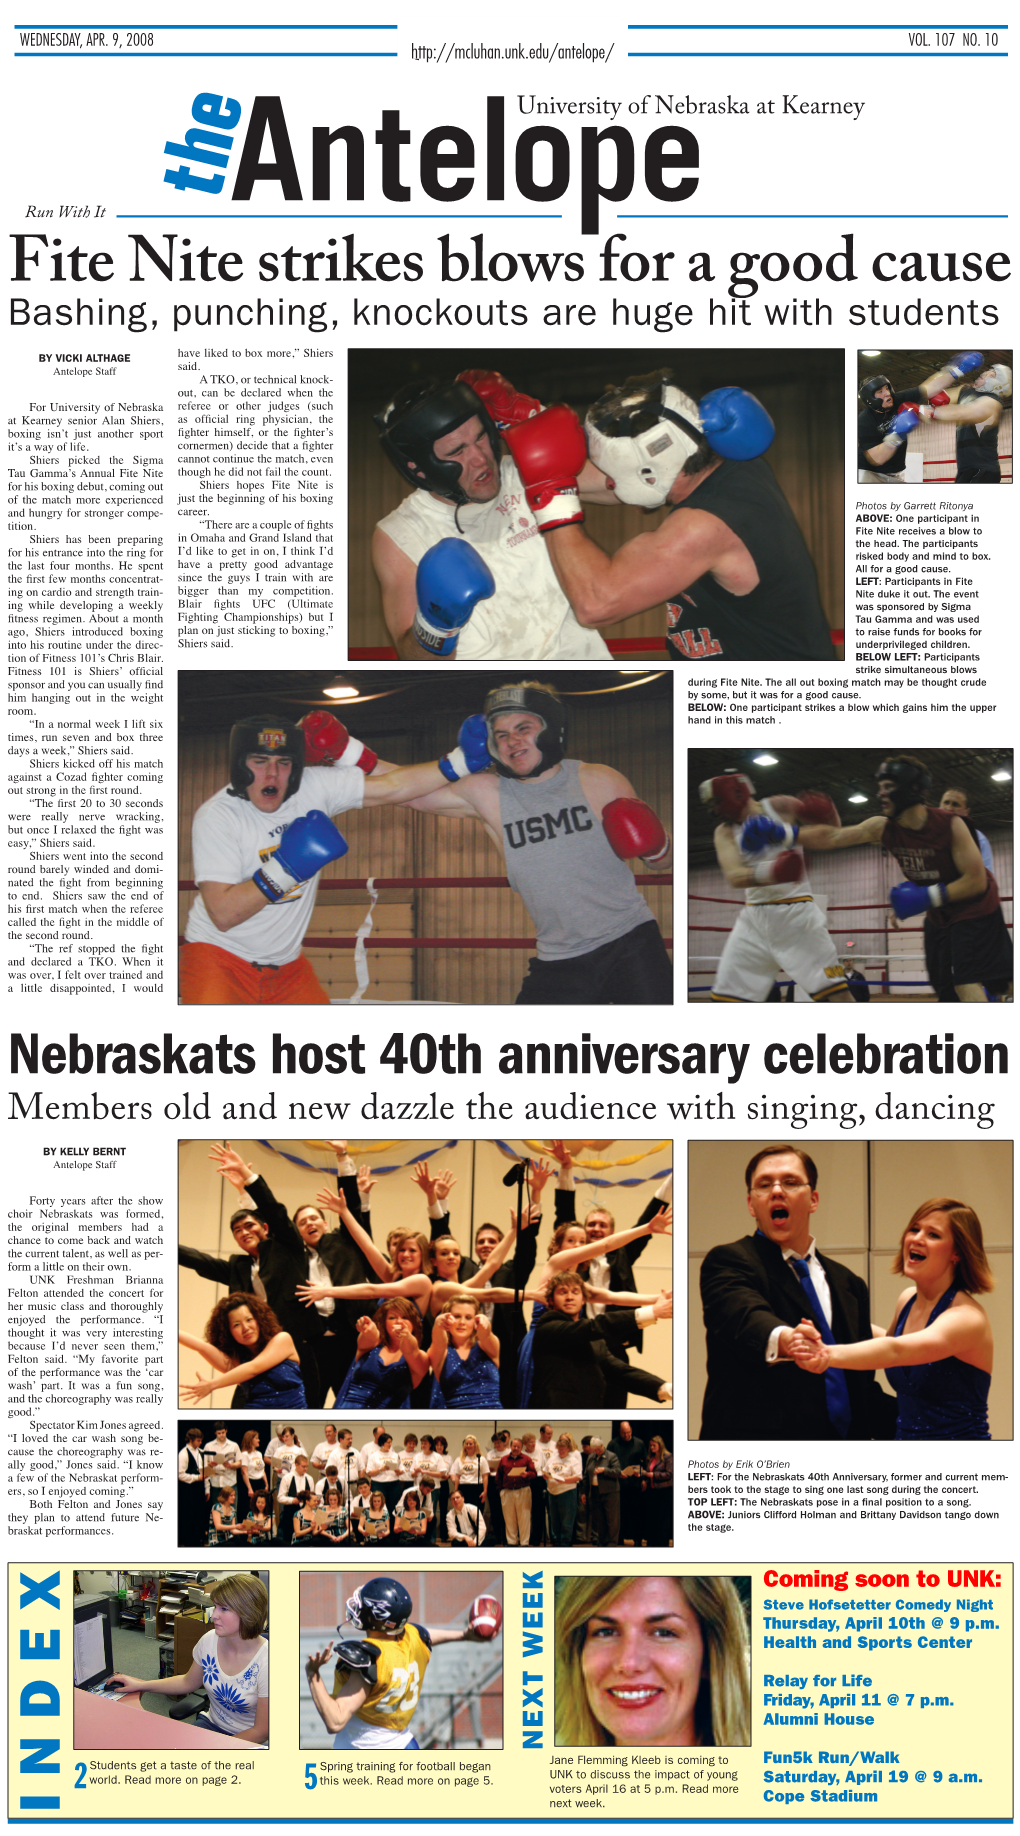 Fite Nite Strikes Blows for a Good Cause